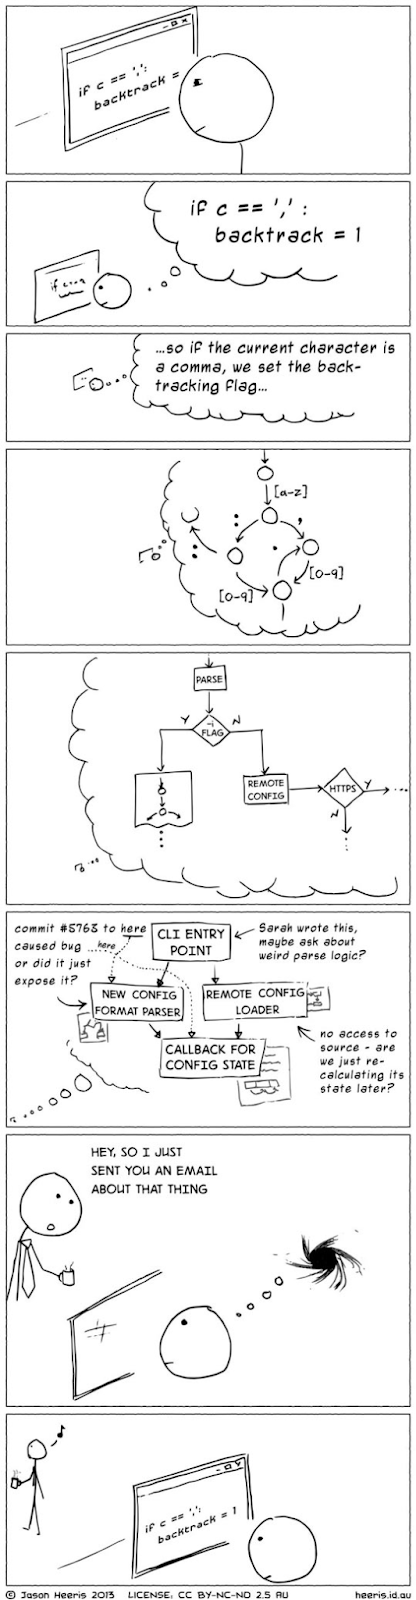 A comic strip illustrating a person's complex thought process in flow state, interrupted by a coworker.